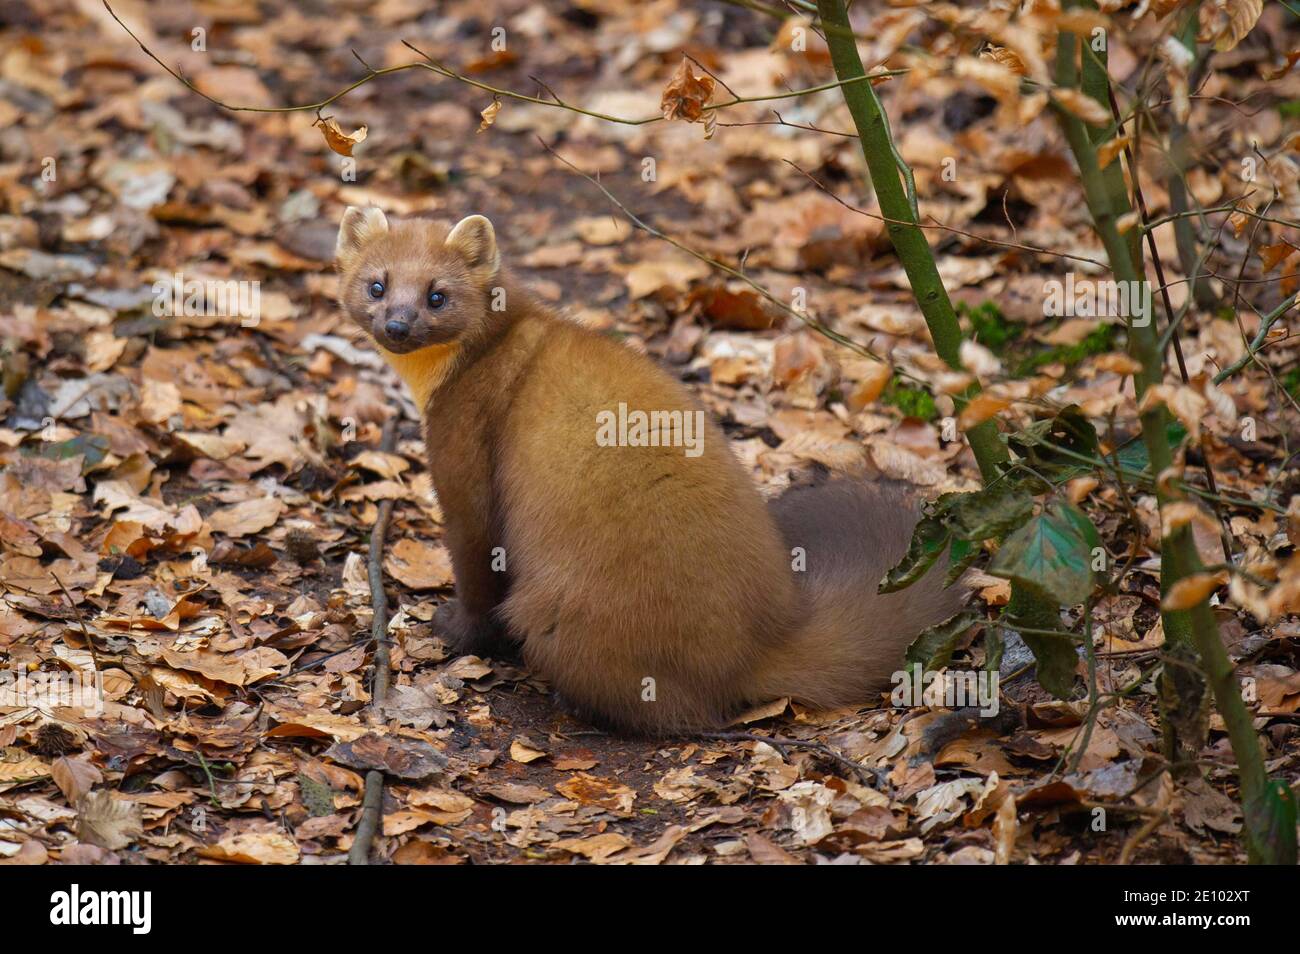 European pine marten (Martes martes) on the forest floor, Vechta, Lower Saxony, Germany, Europe Stock Photo